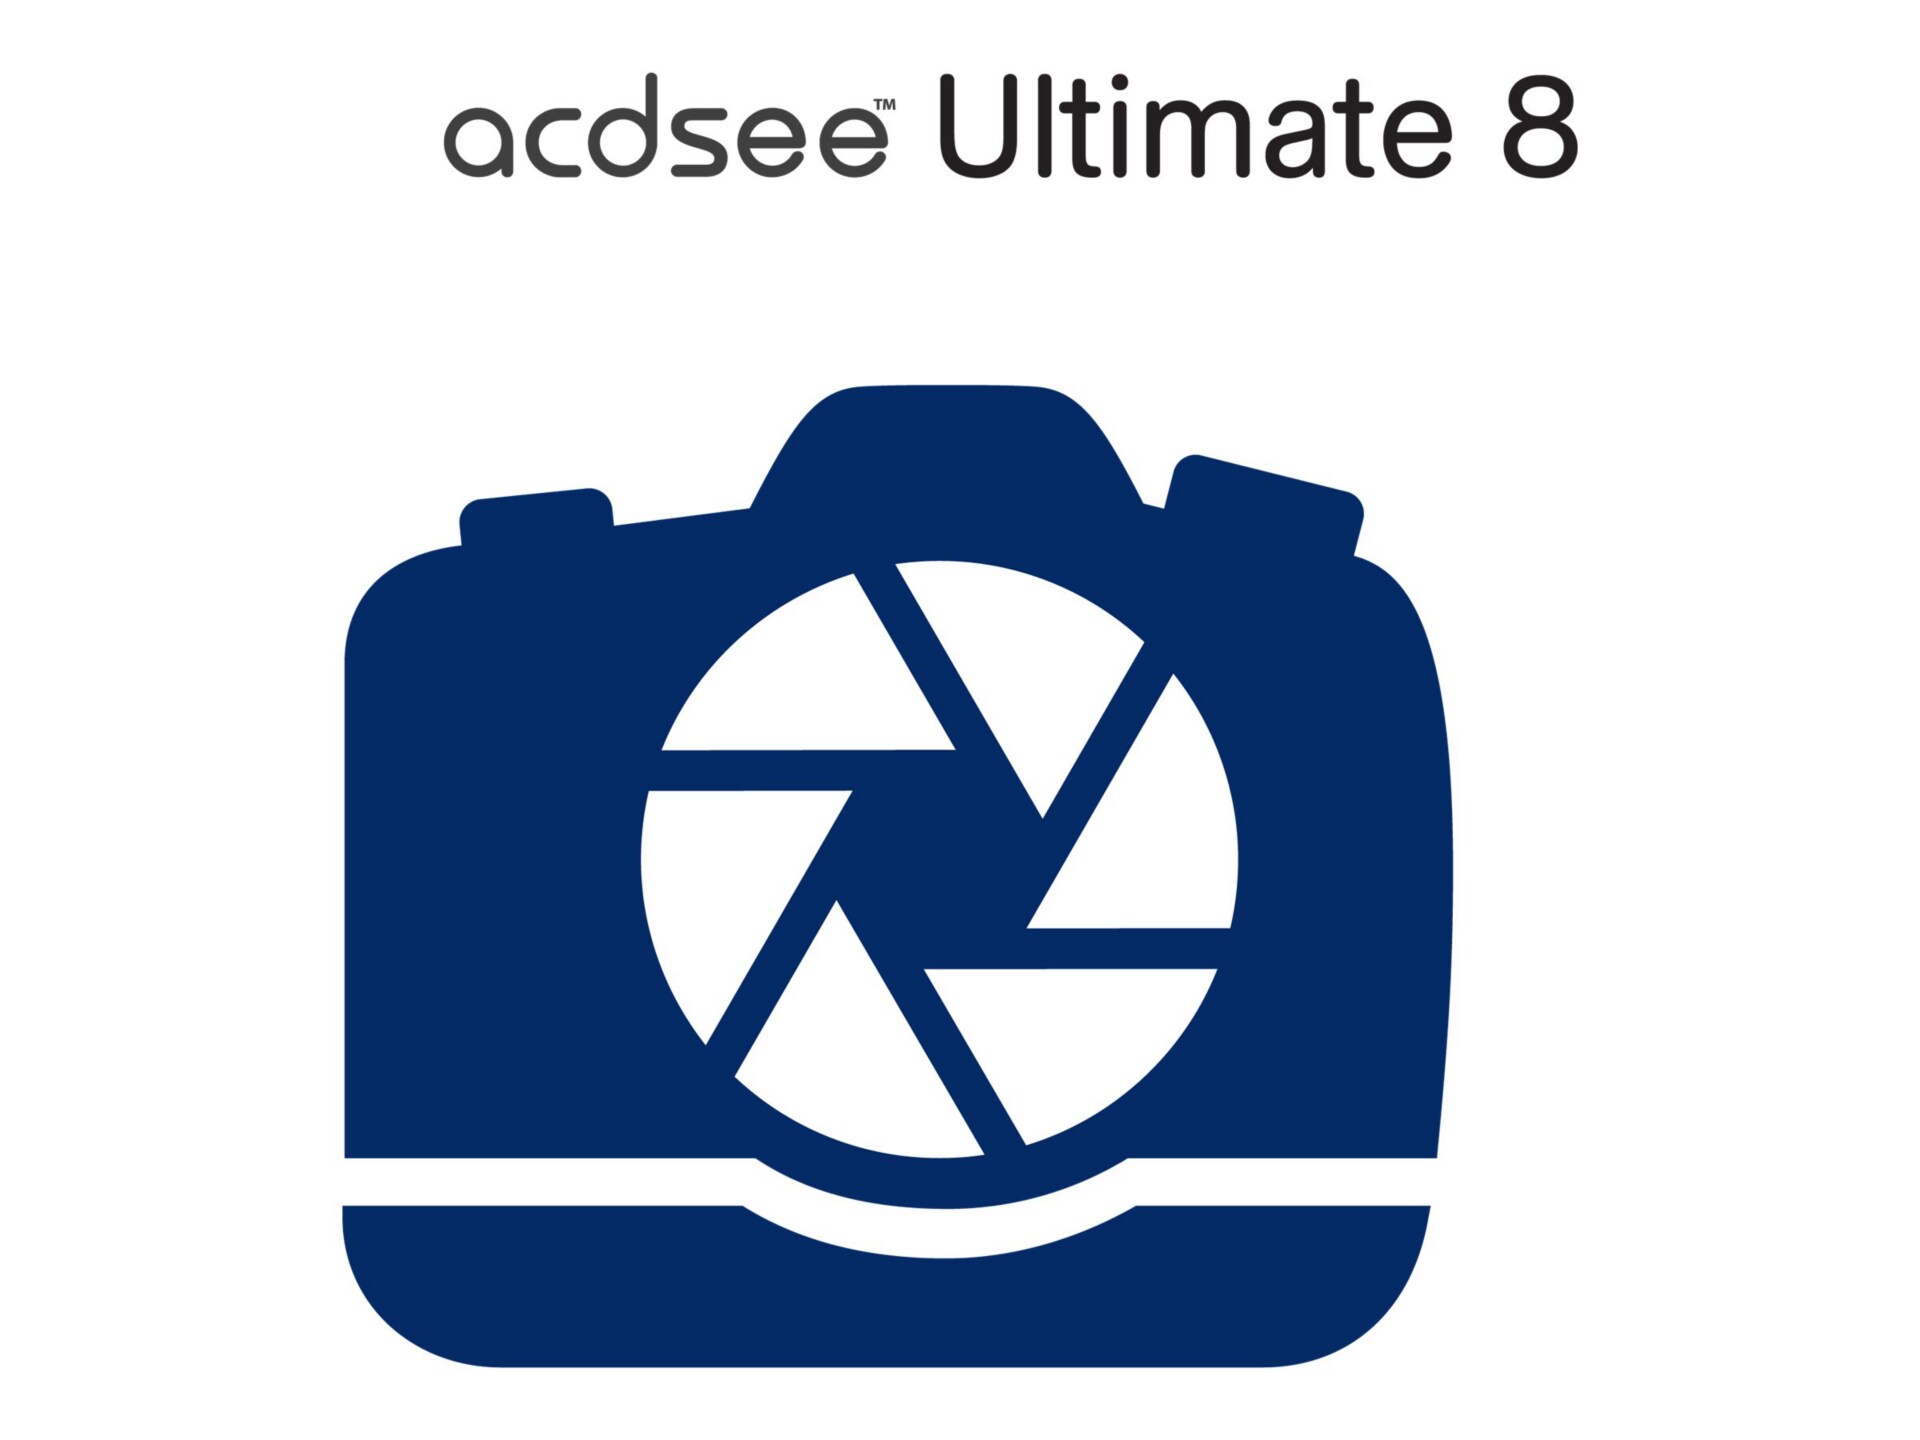 ACDSee Ultimate (v. 8) - product upgrade license - 1 user